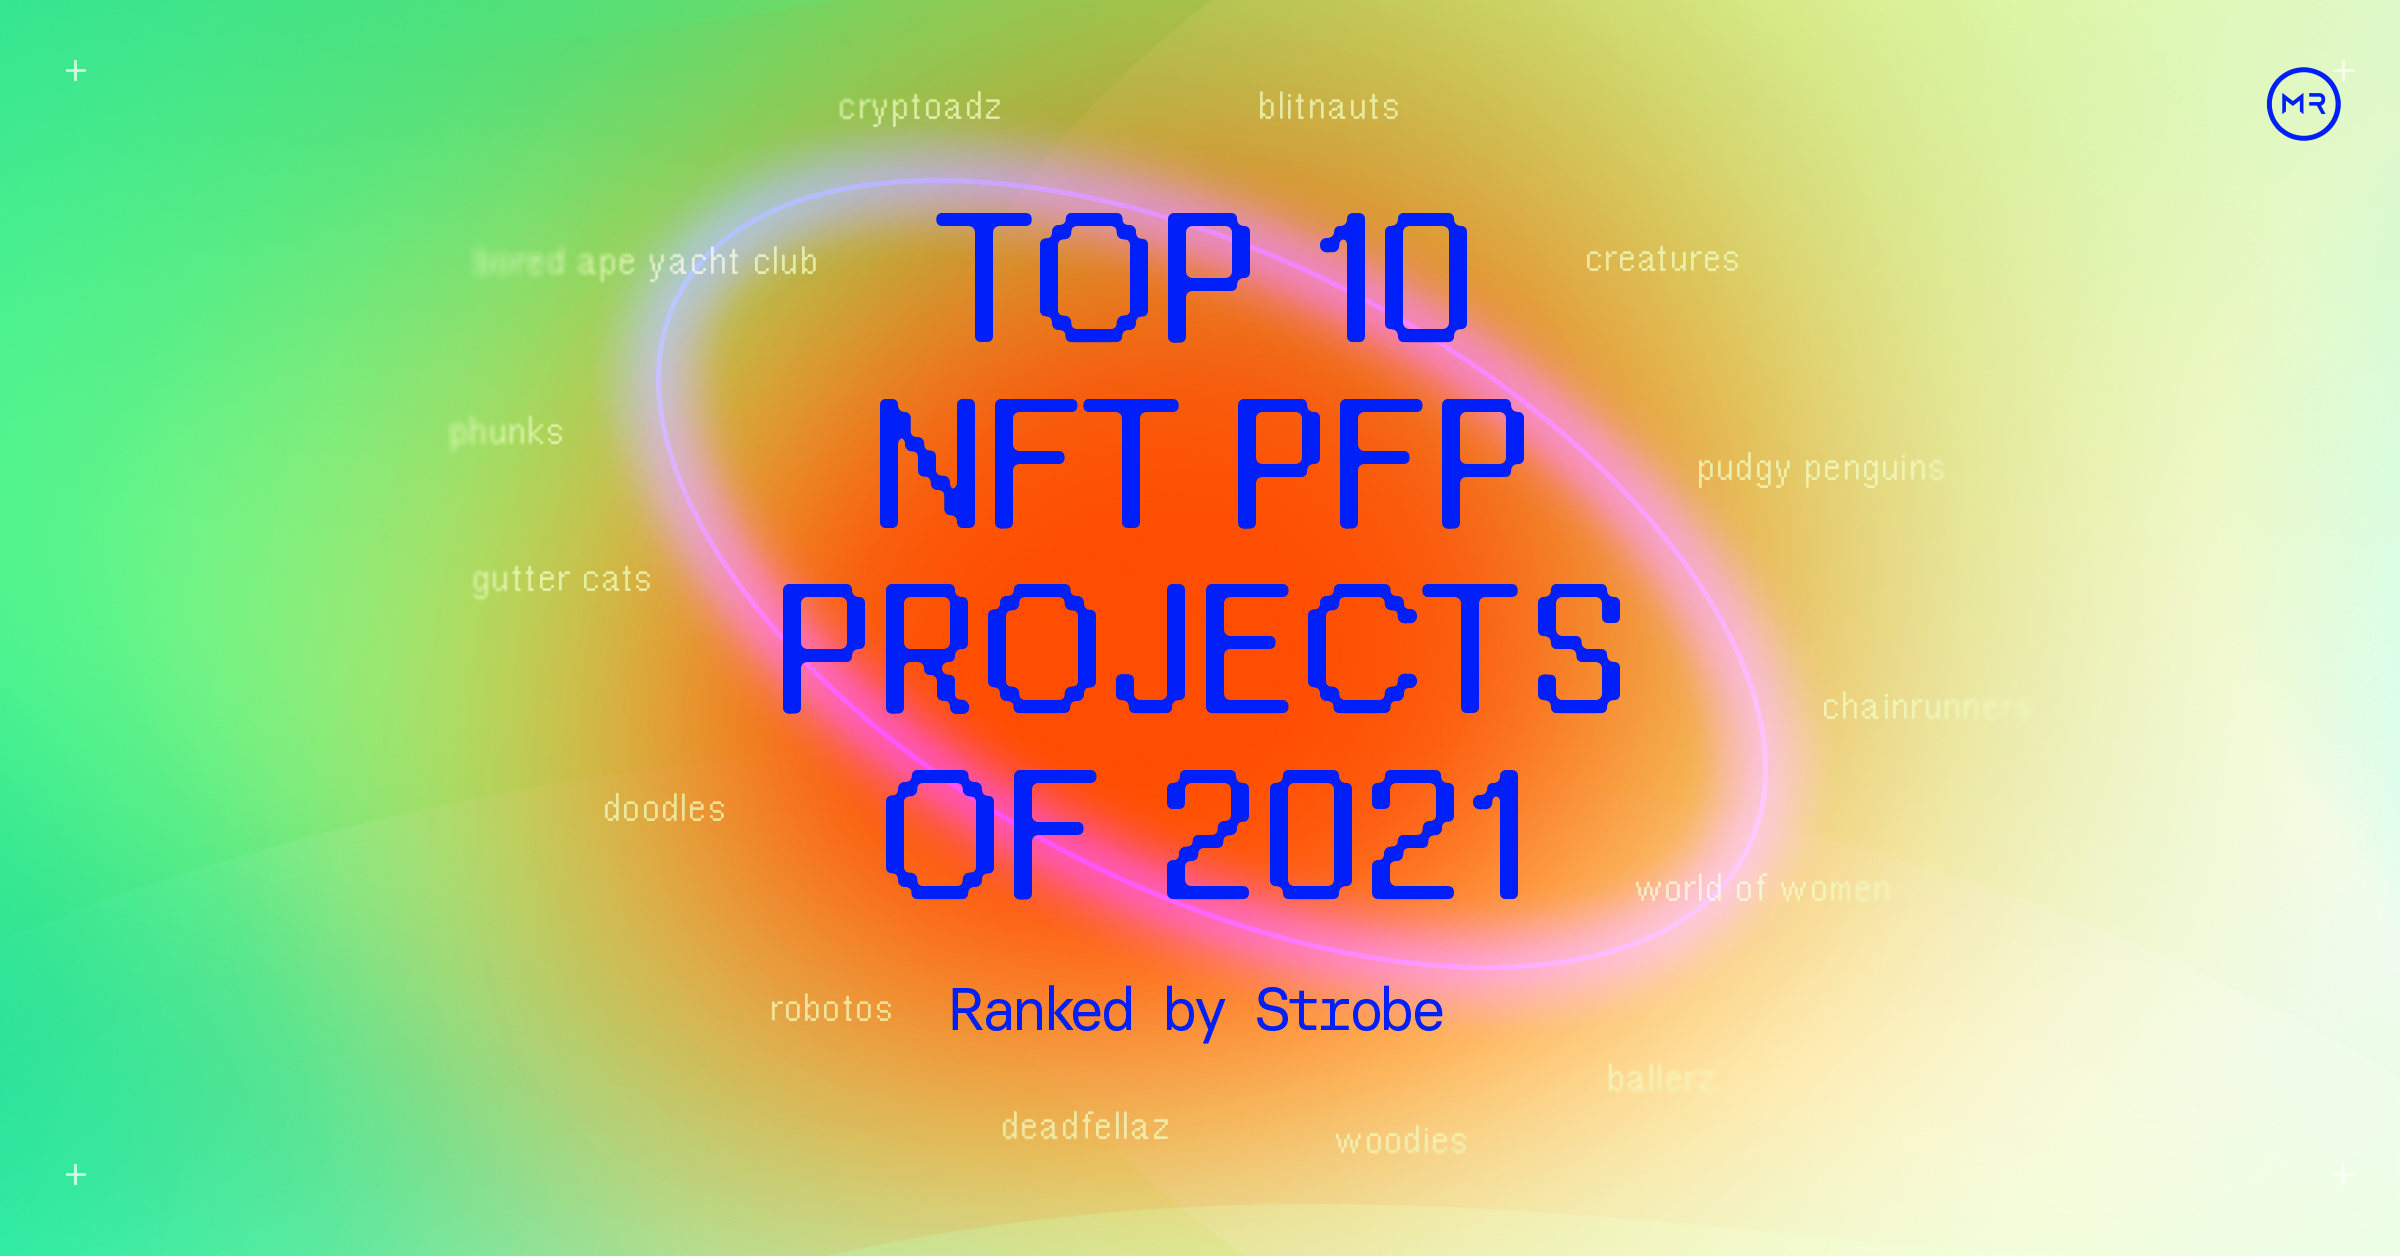 The Top 10 NFT PFP Projects of 2021: NFT Rankings